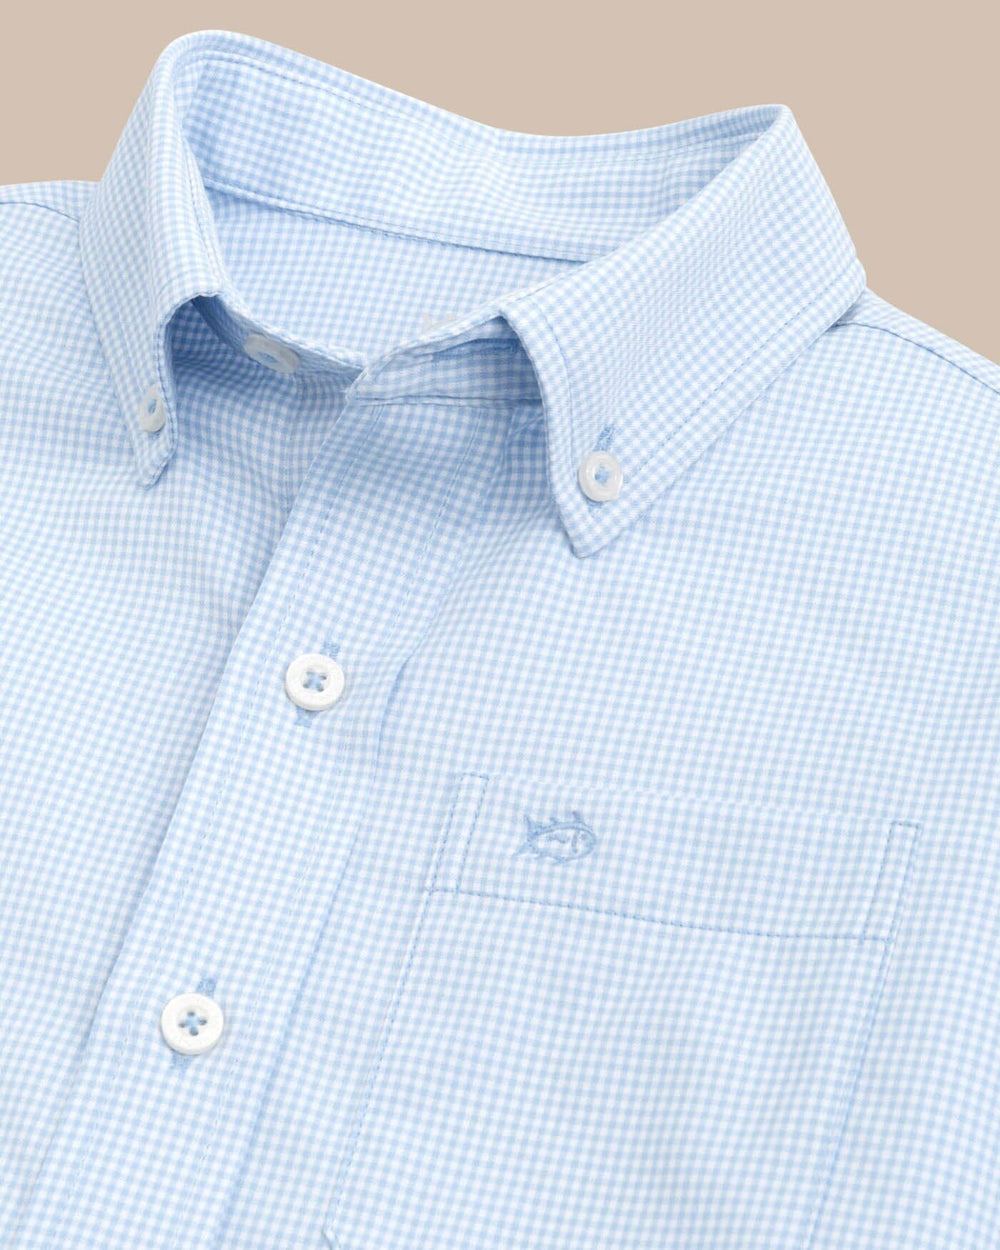 The detail view of the Southern Tide Boys mini gingham intercoastal buttn down shirt by Southern Tide - Tide Blue